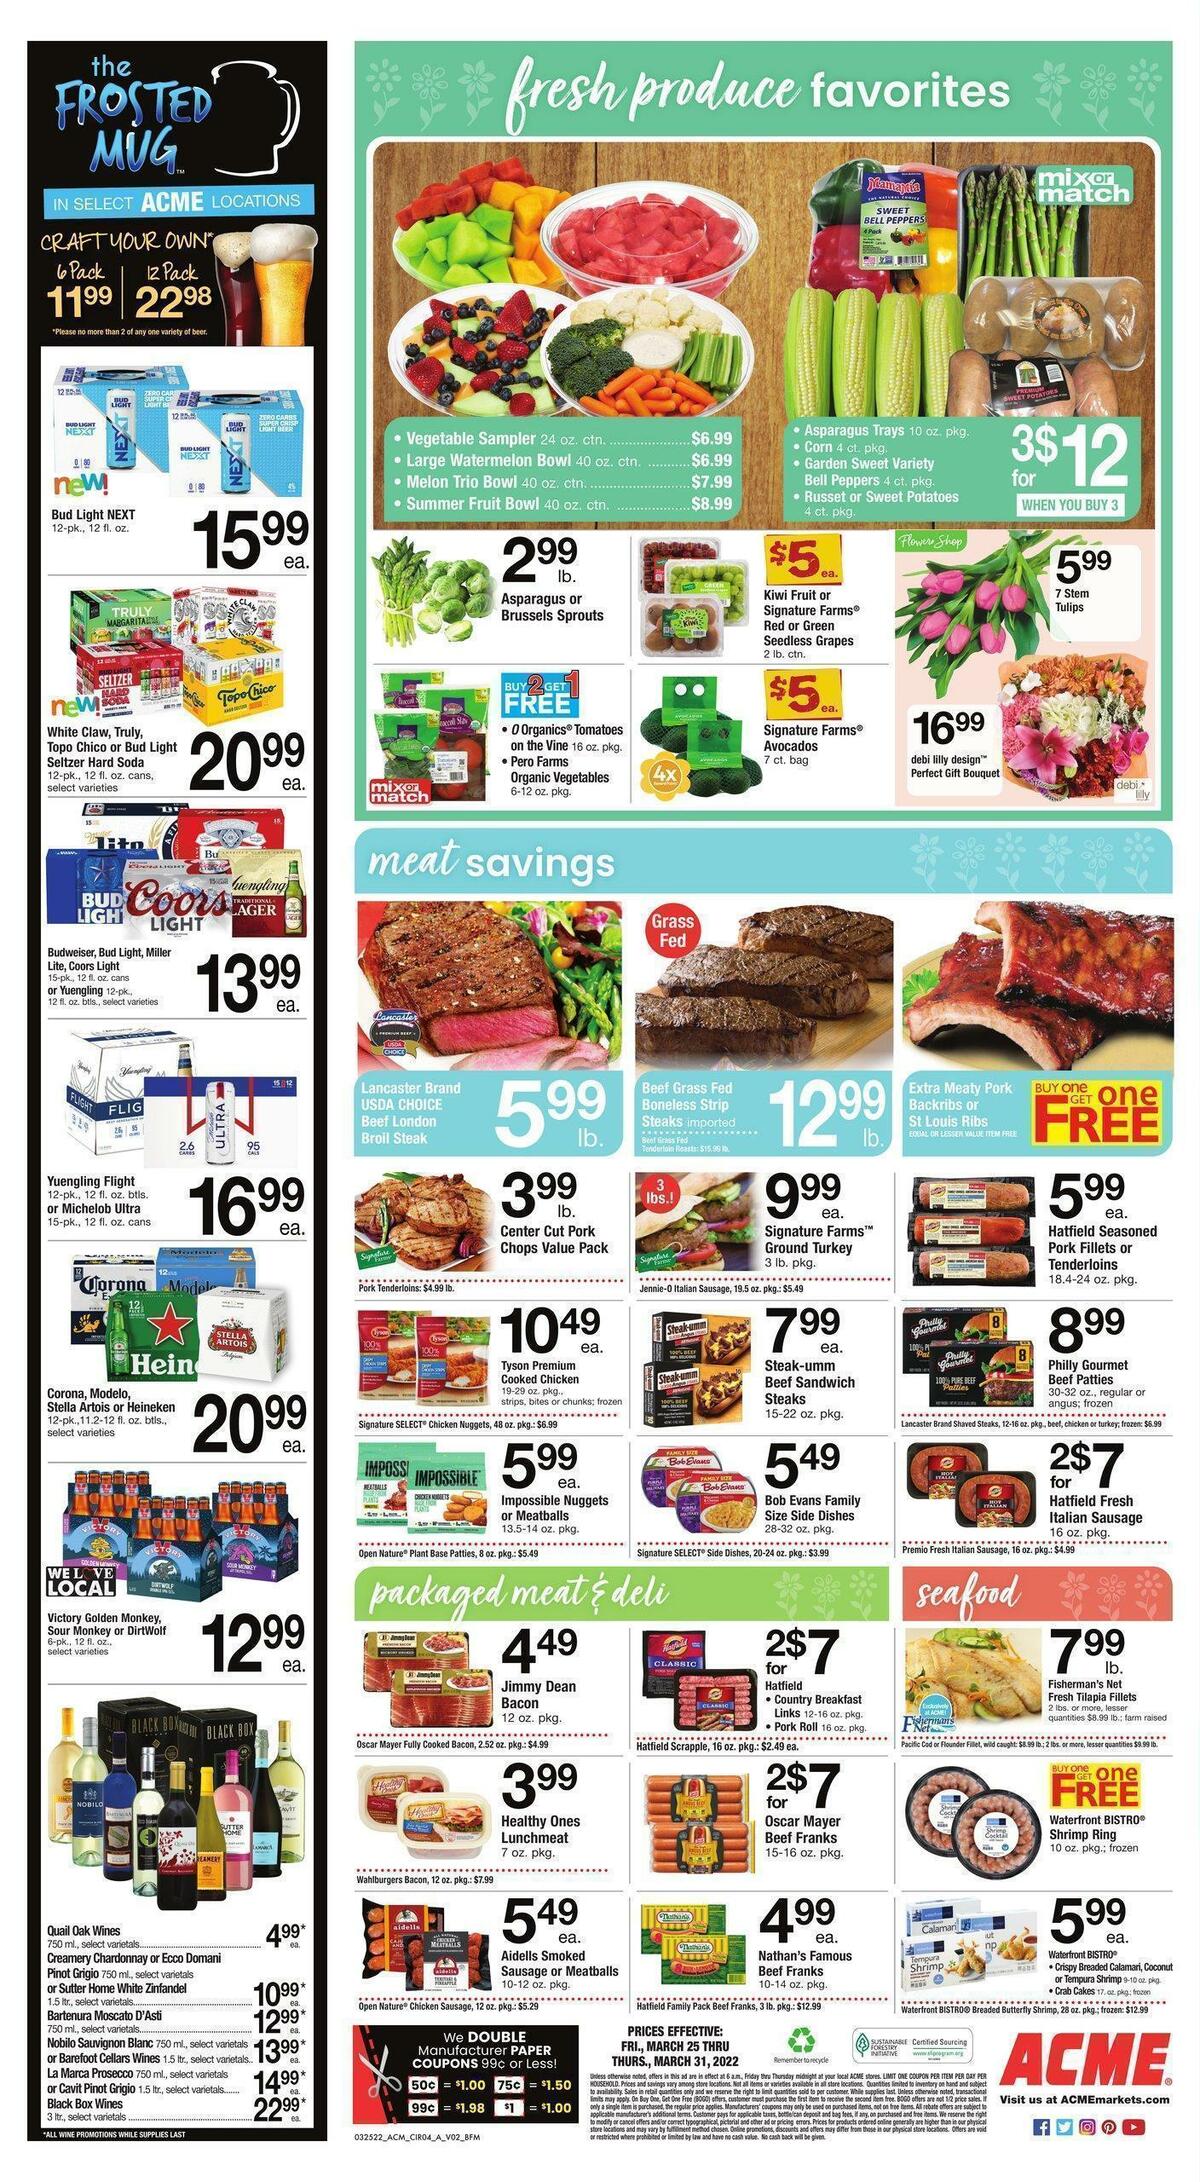 ACME Markets Weekly Ad from March 25